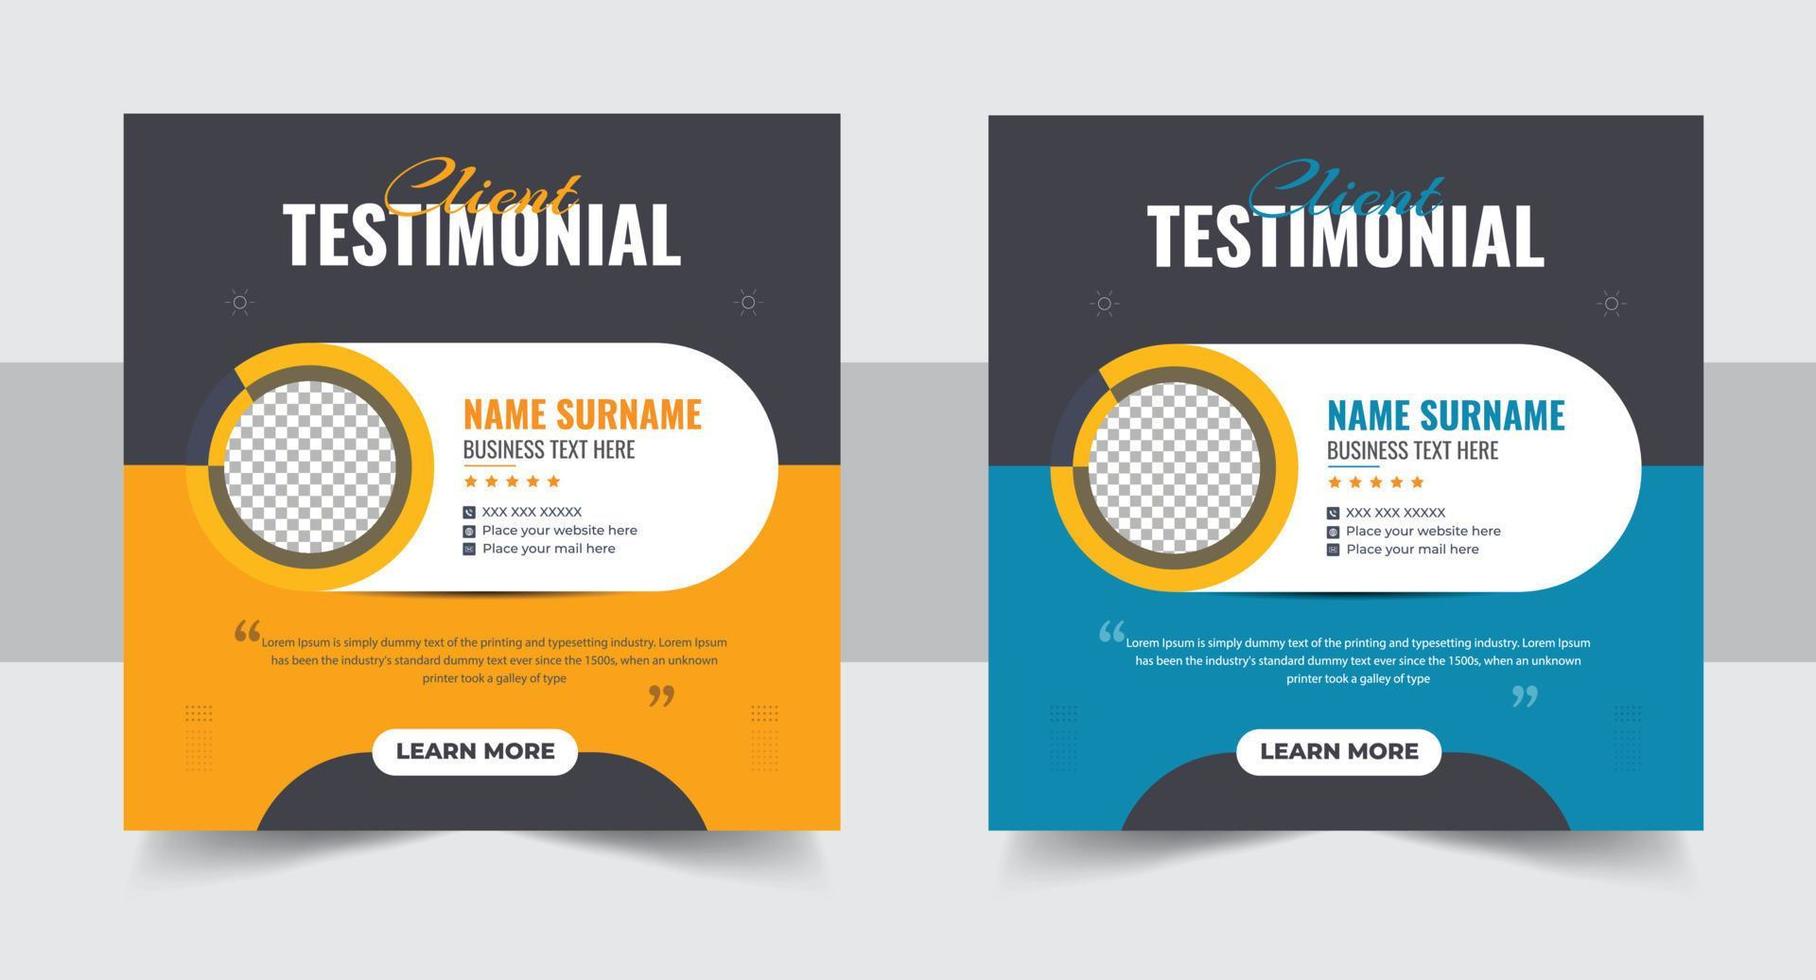 Client testimonial and feedback review template bundle with dark and yellow colors. Customer satisfaction and work review poster set vector for marketing. Business promotion website layout